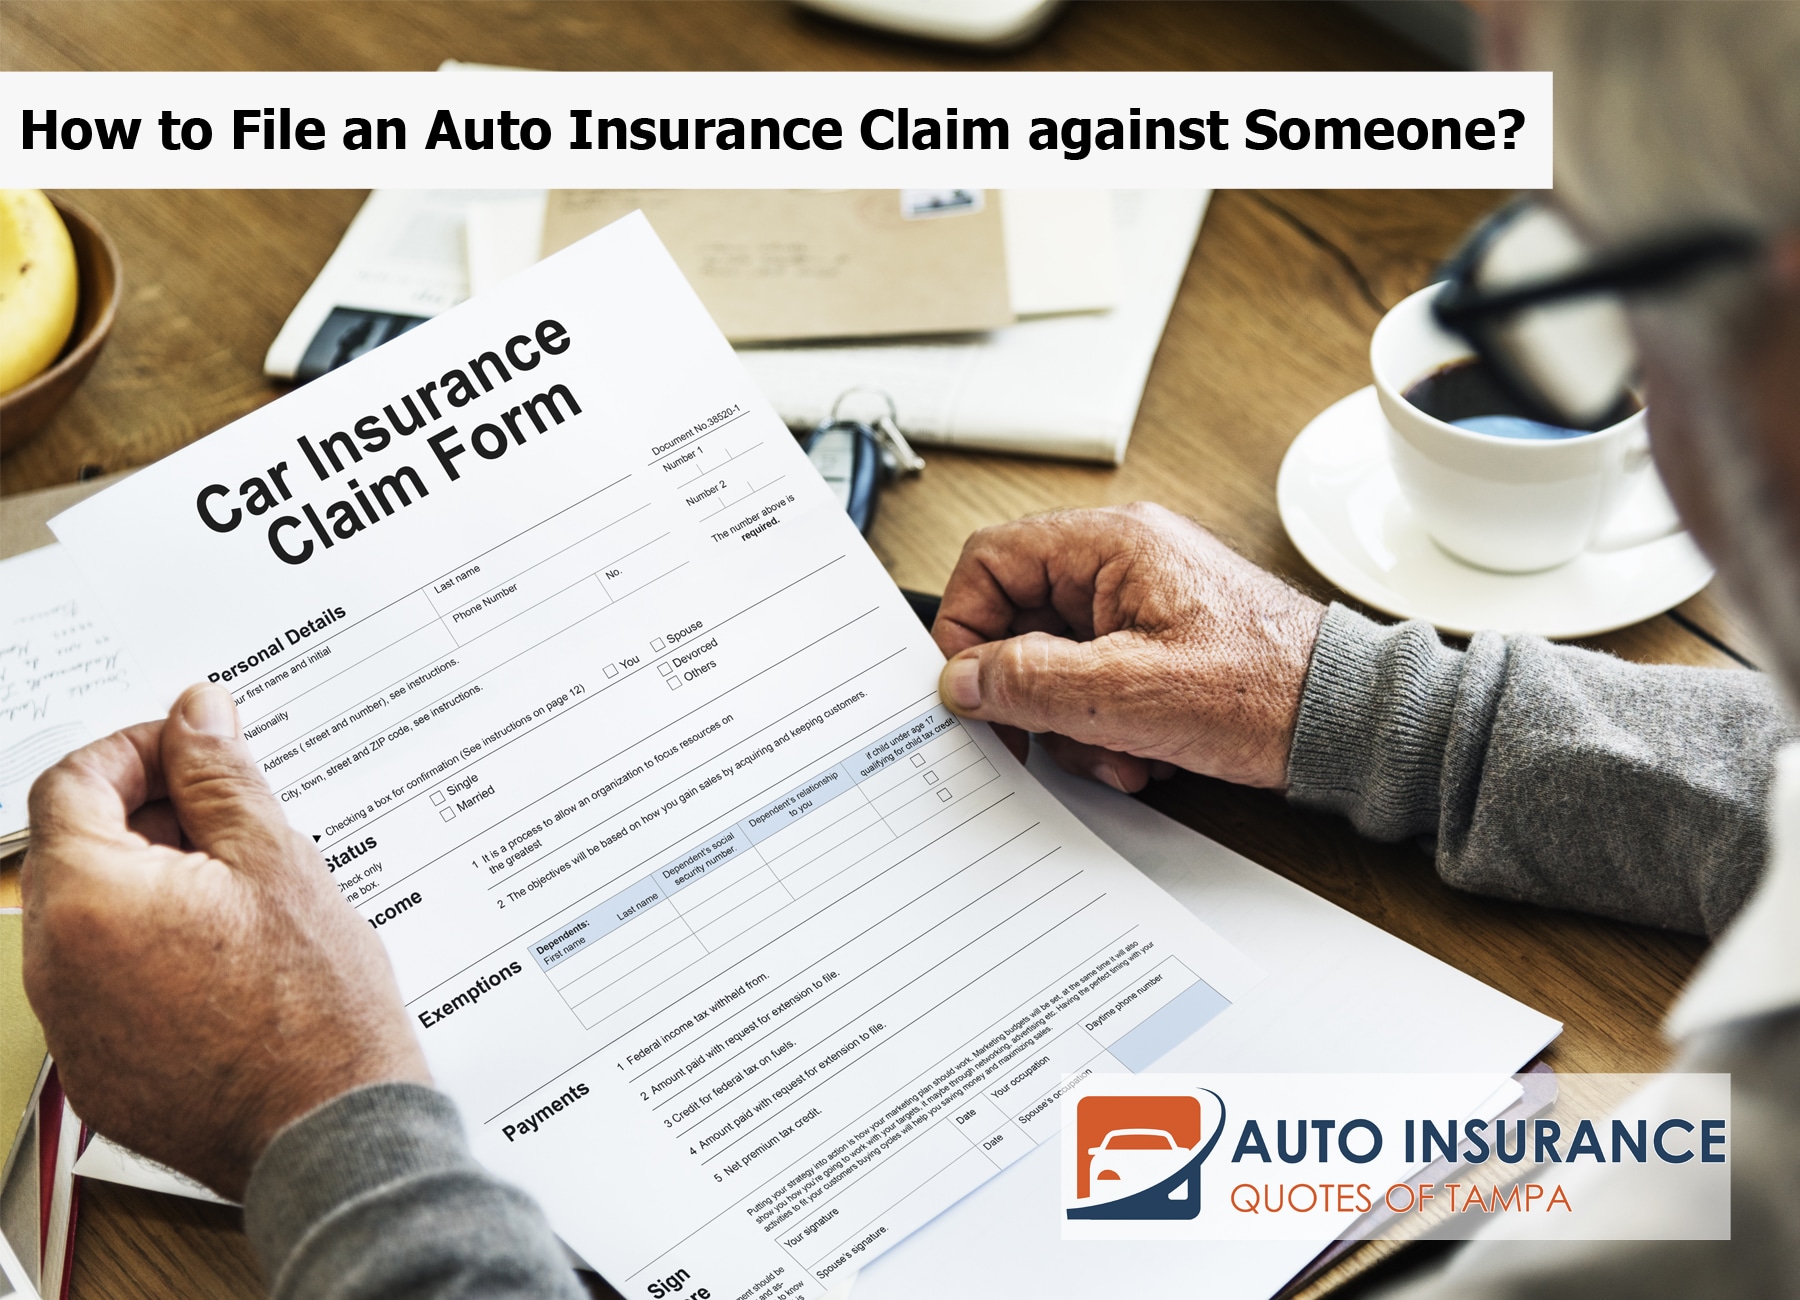 How to File an Auto Insurance Claim against Someone?